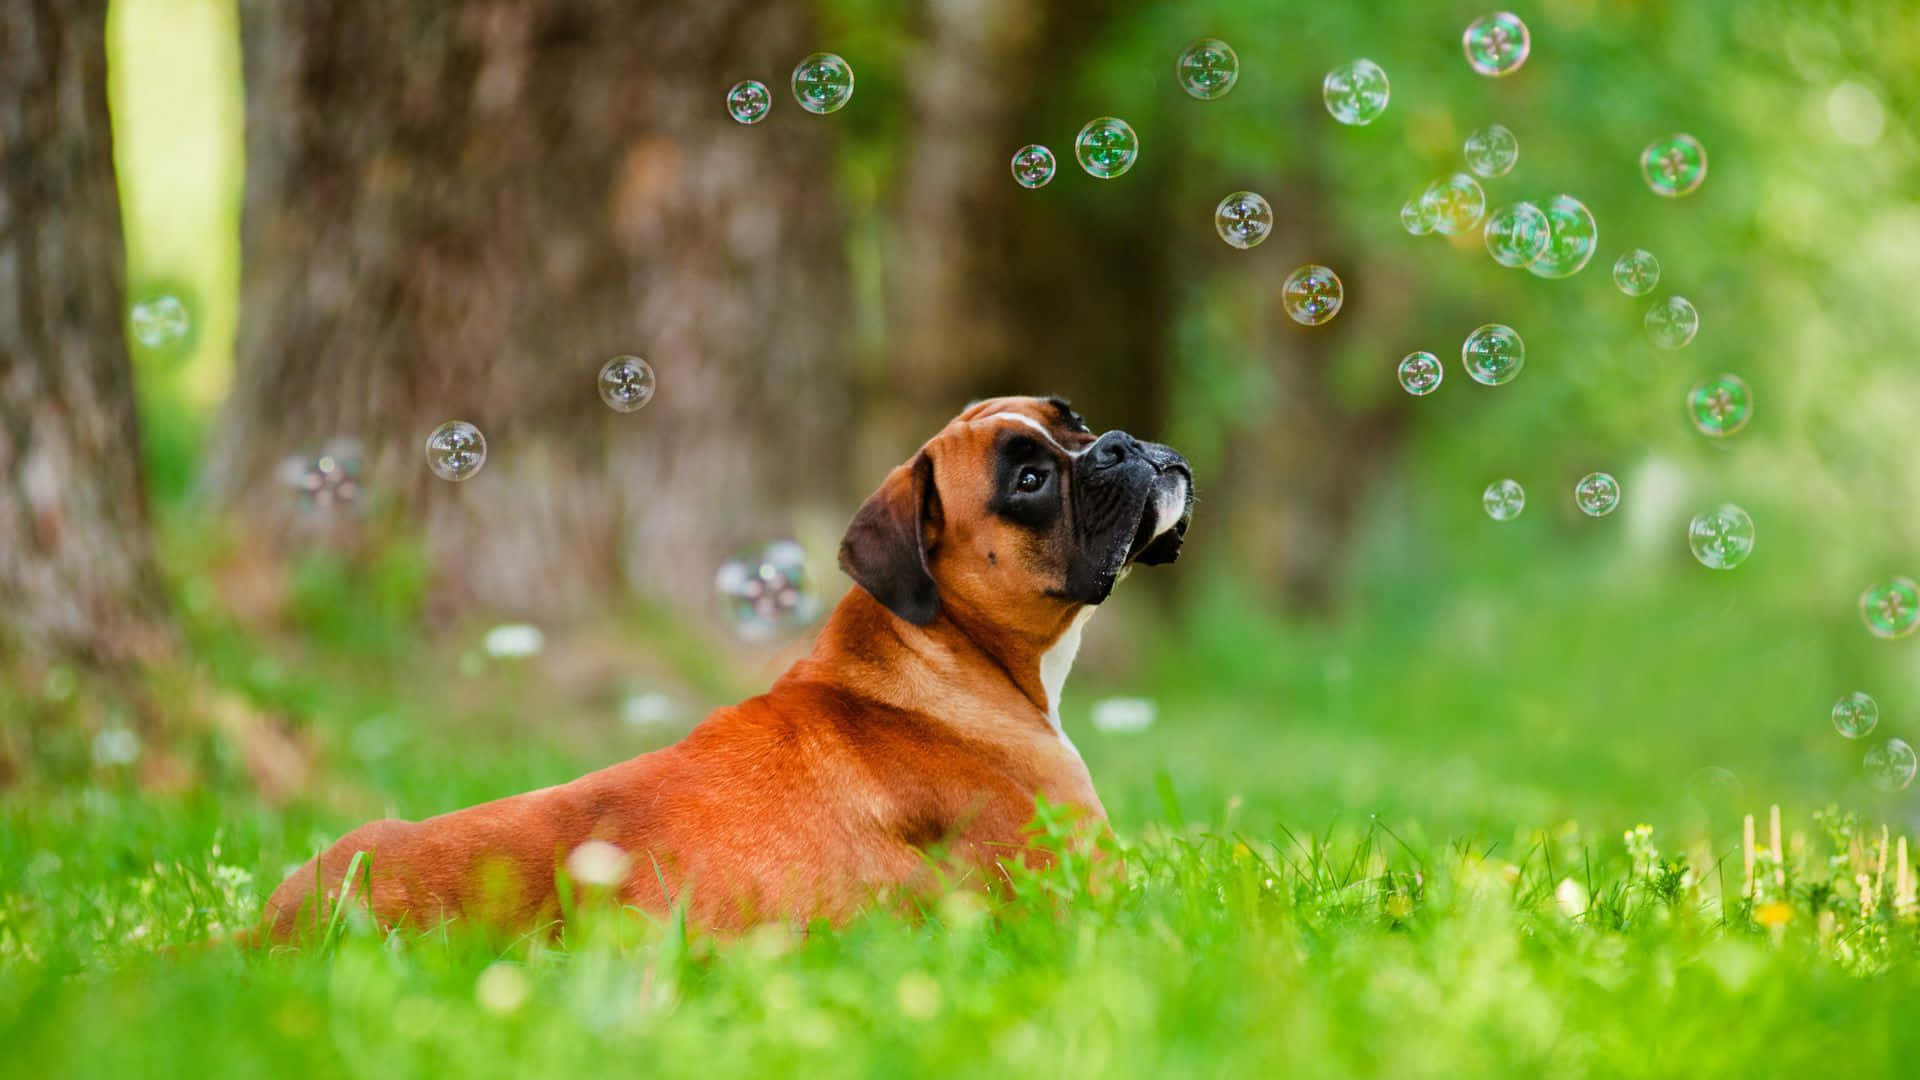 Boxer Dog In The Grass With Bubbles